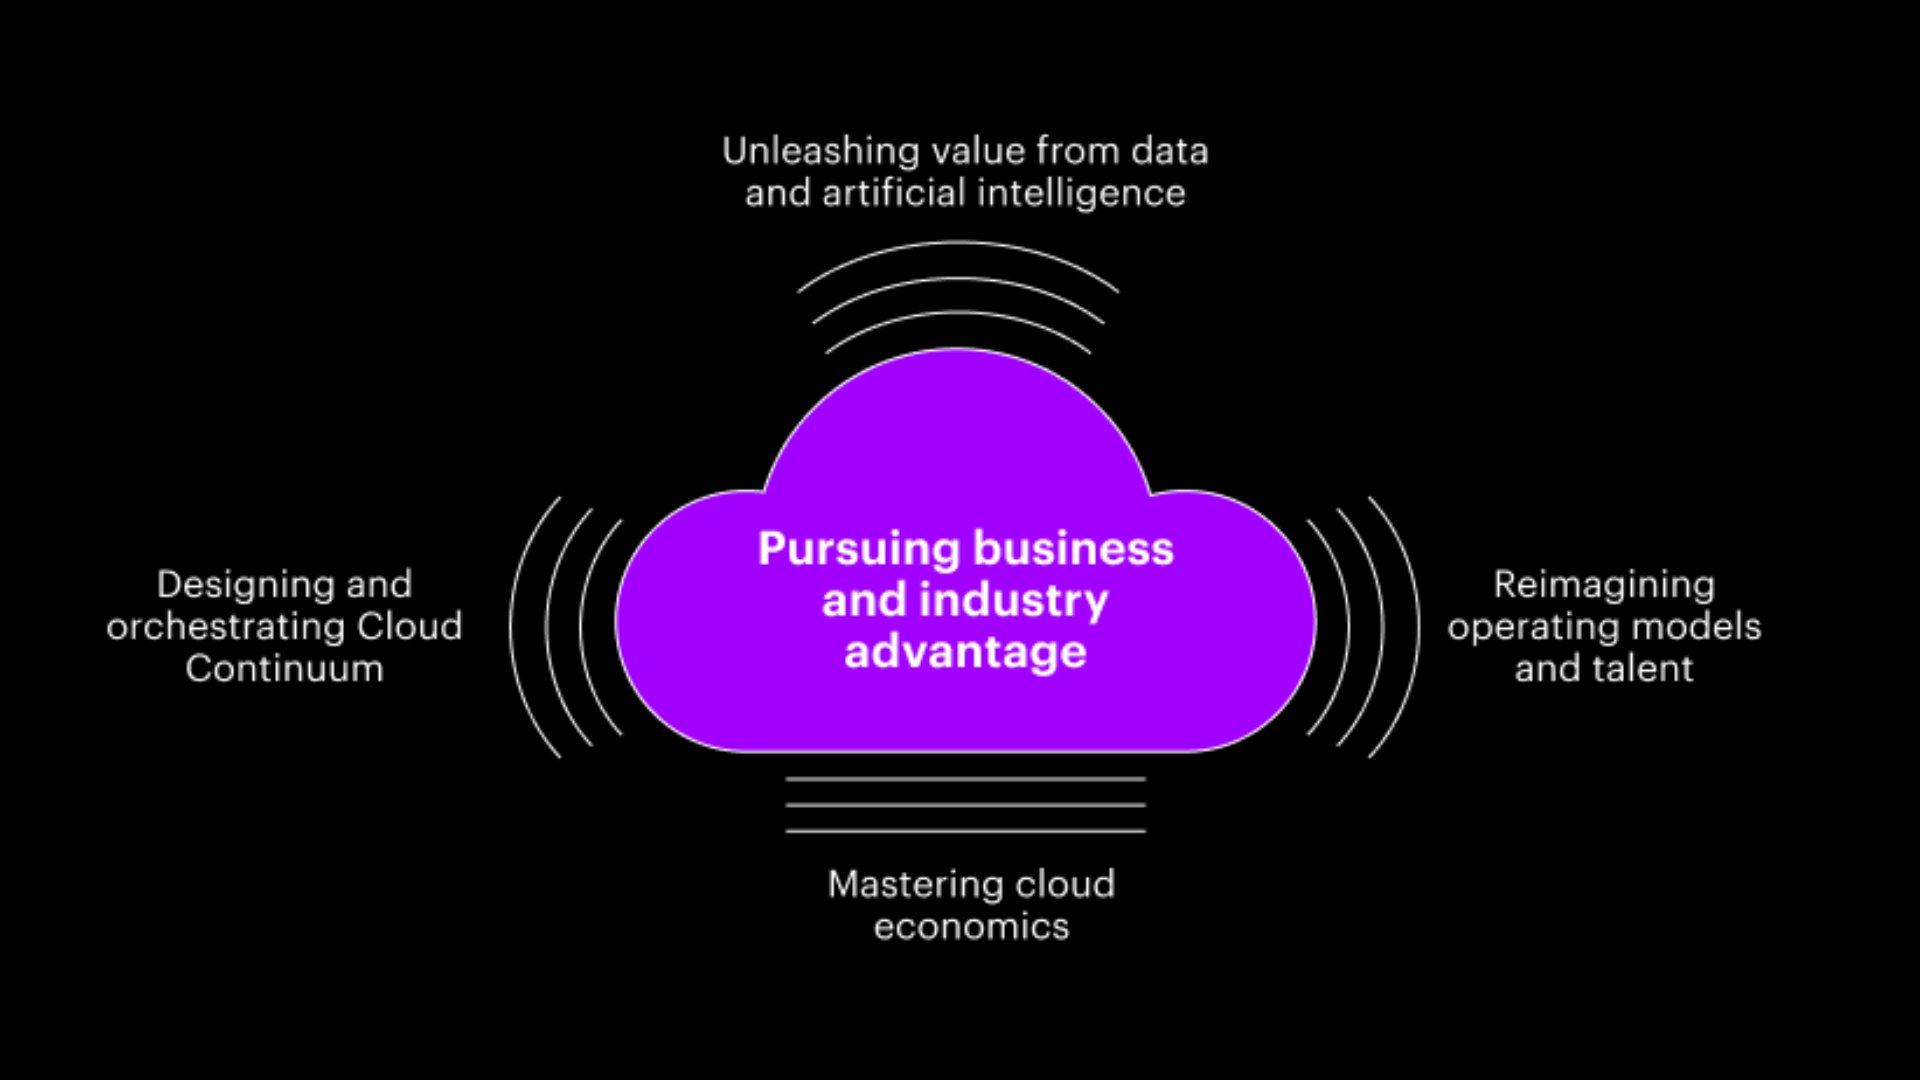 Five practices to help companies extract maximum value from the cloud: design and orchestrate the cloud continuum, master cloud economics, reimage operating module and talent, unleadh value from data and AI, and pursue business and industry advantage.